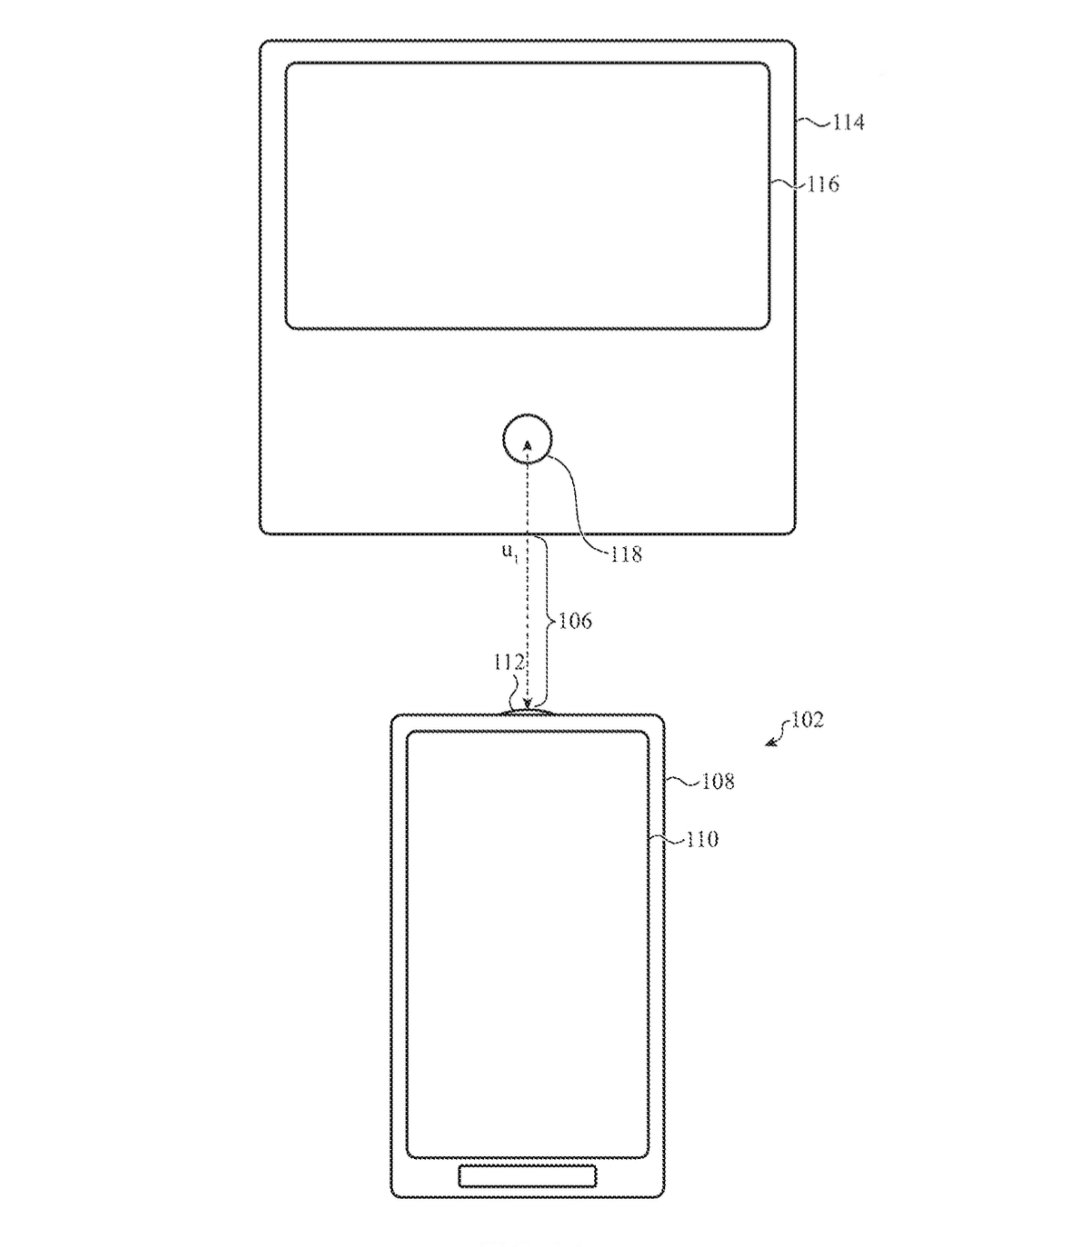 Detail from the patent showing an iPhone controlling another device